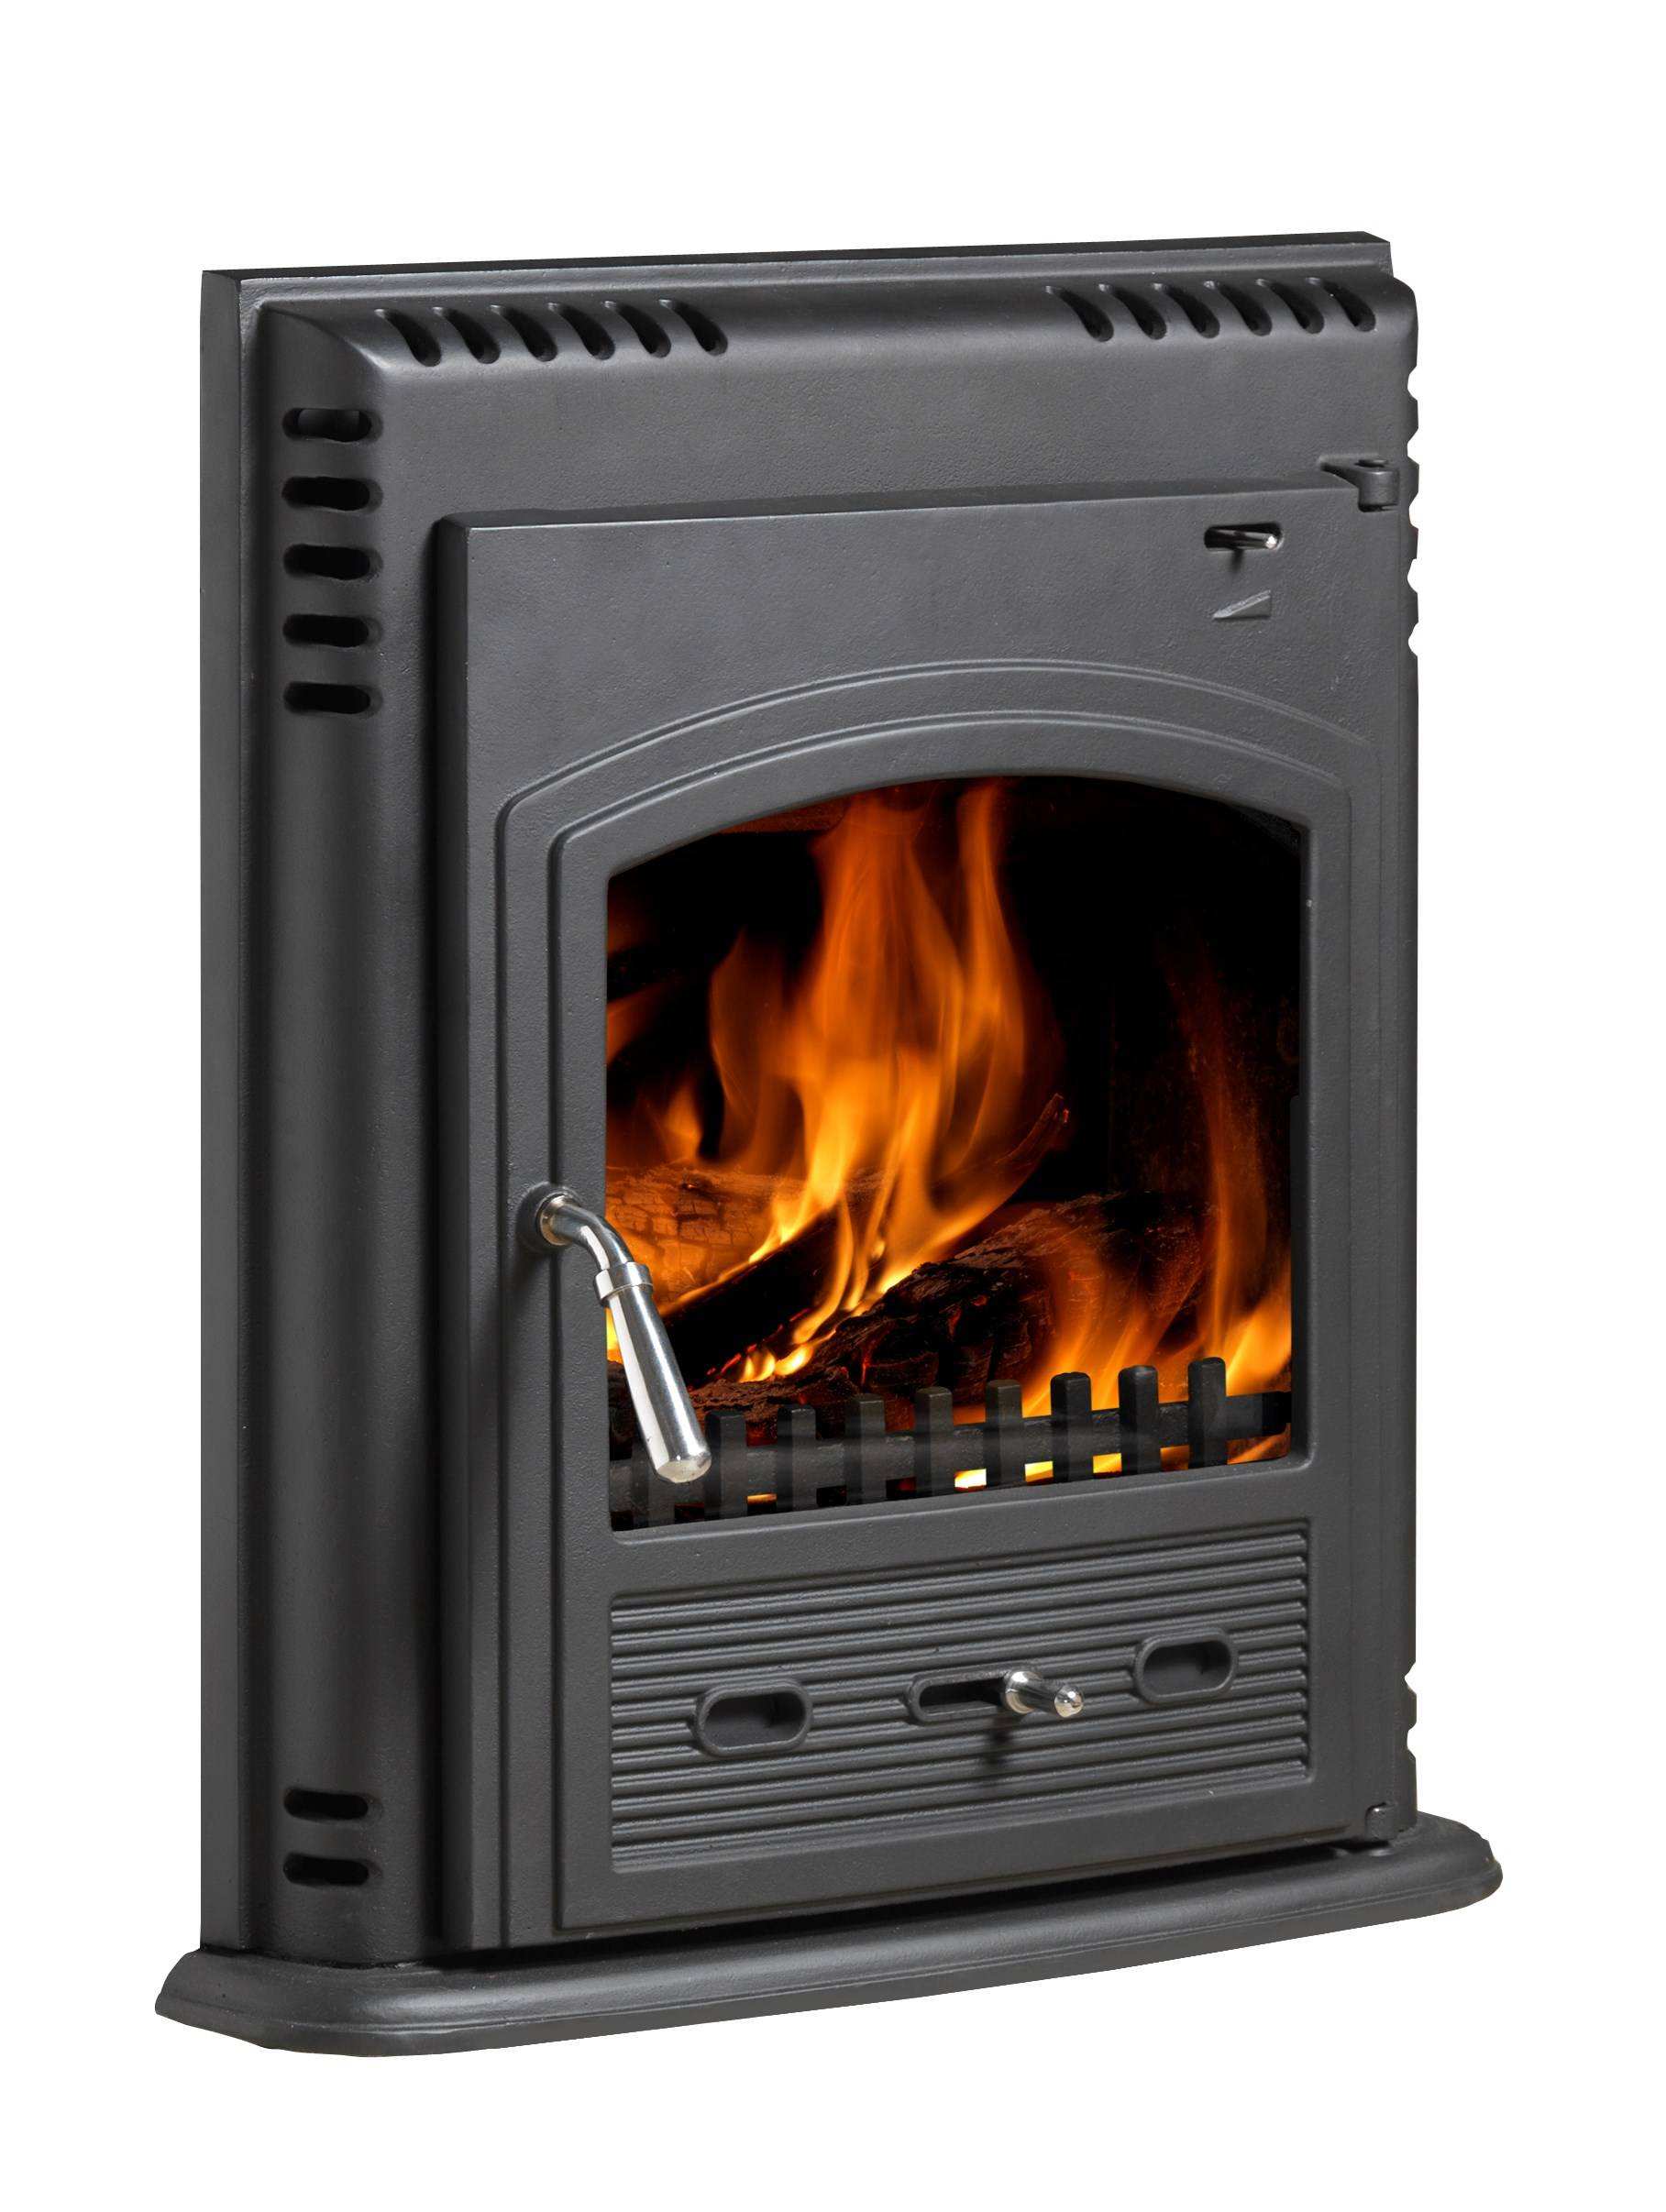 Fireplace Heater Best Of Awesome Dimplex Stoves theibizakitchen